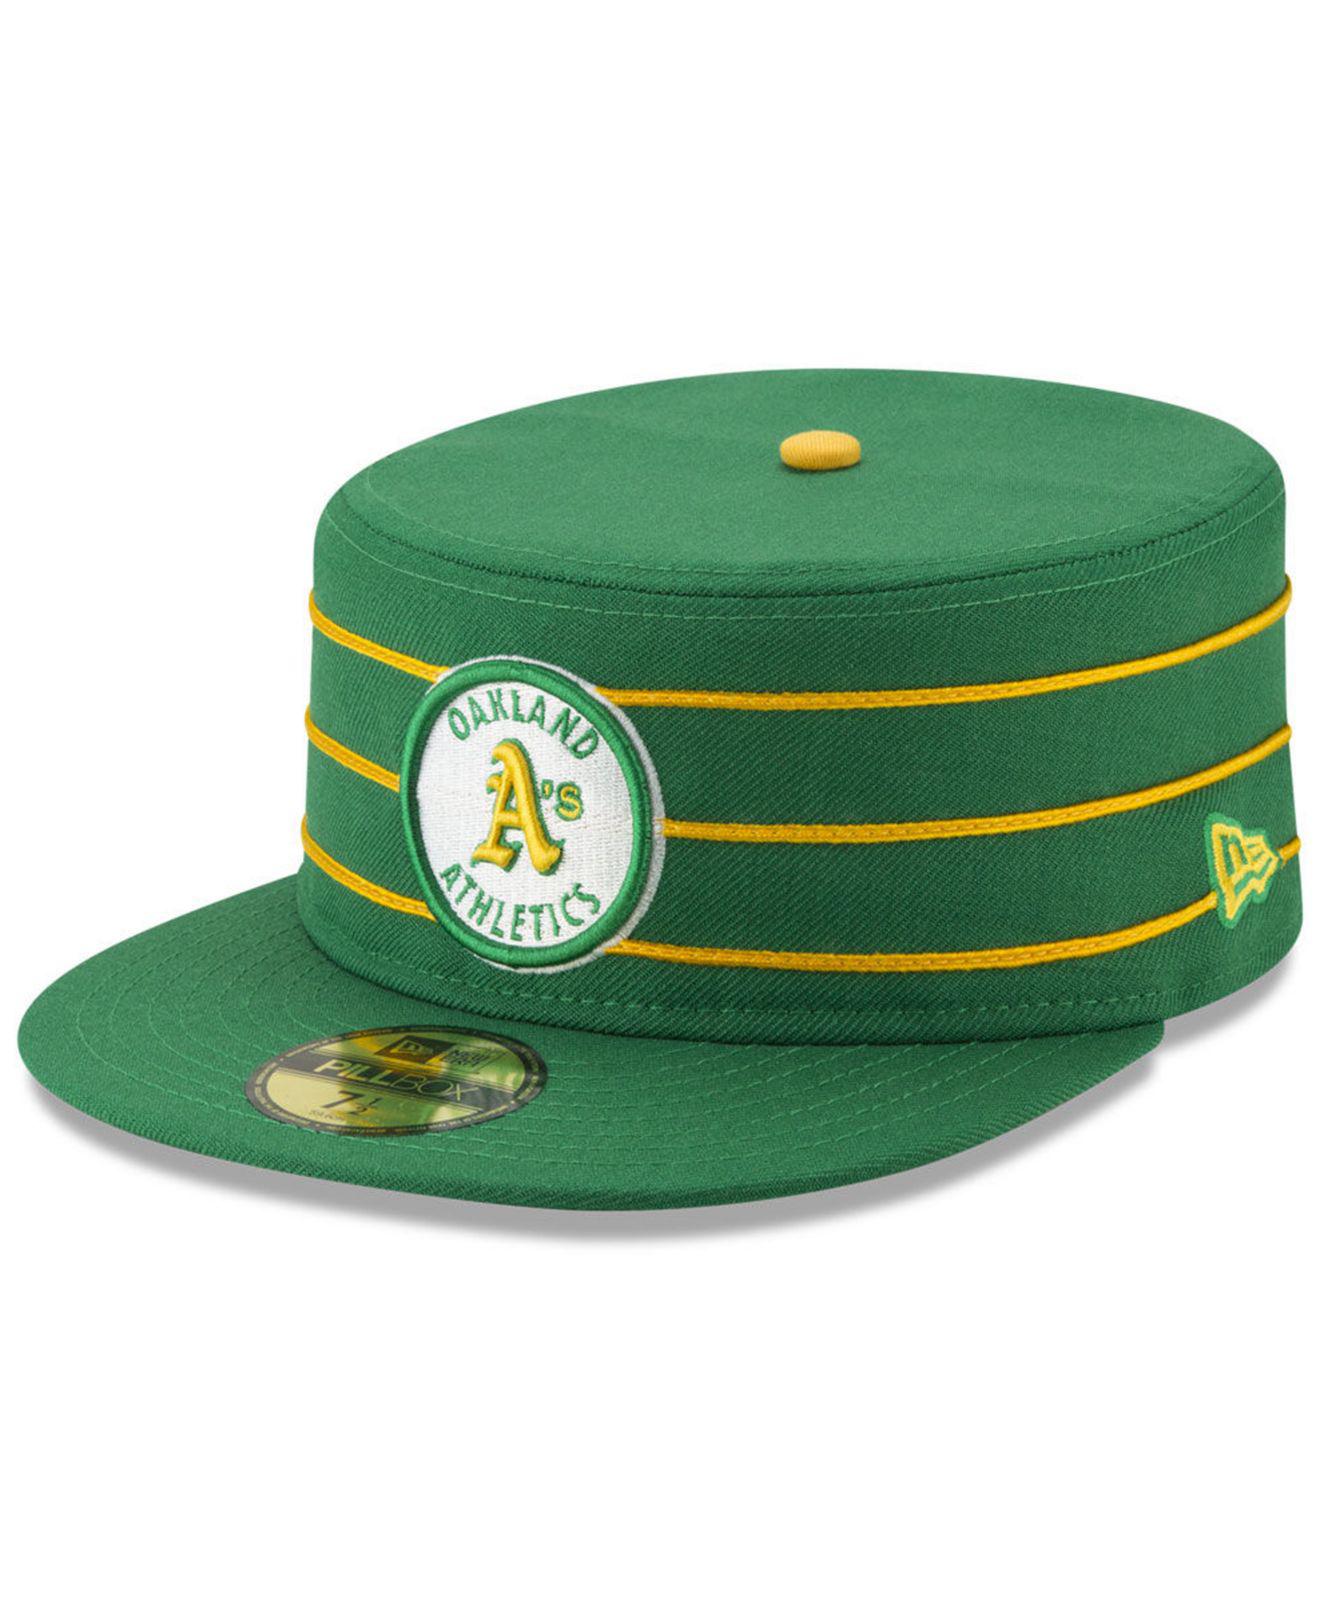 KTZ Oakland Athletics Pillbox 59fifty-fitted Cap in Green for Men